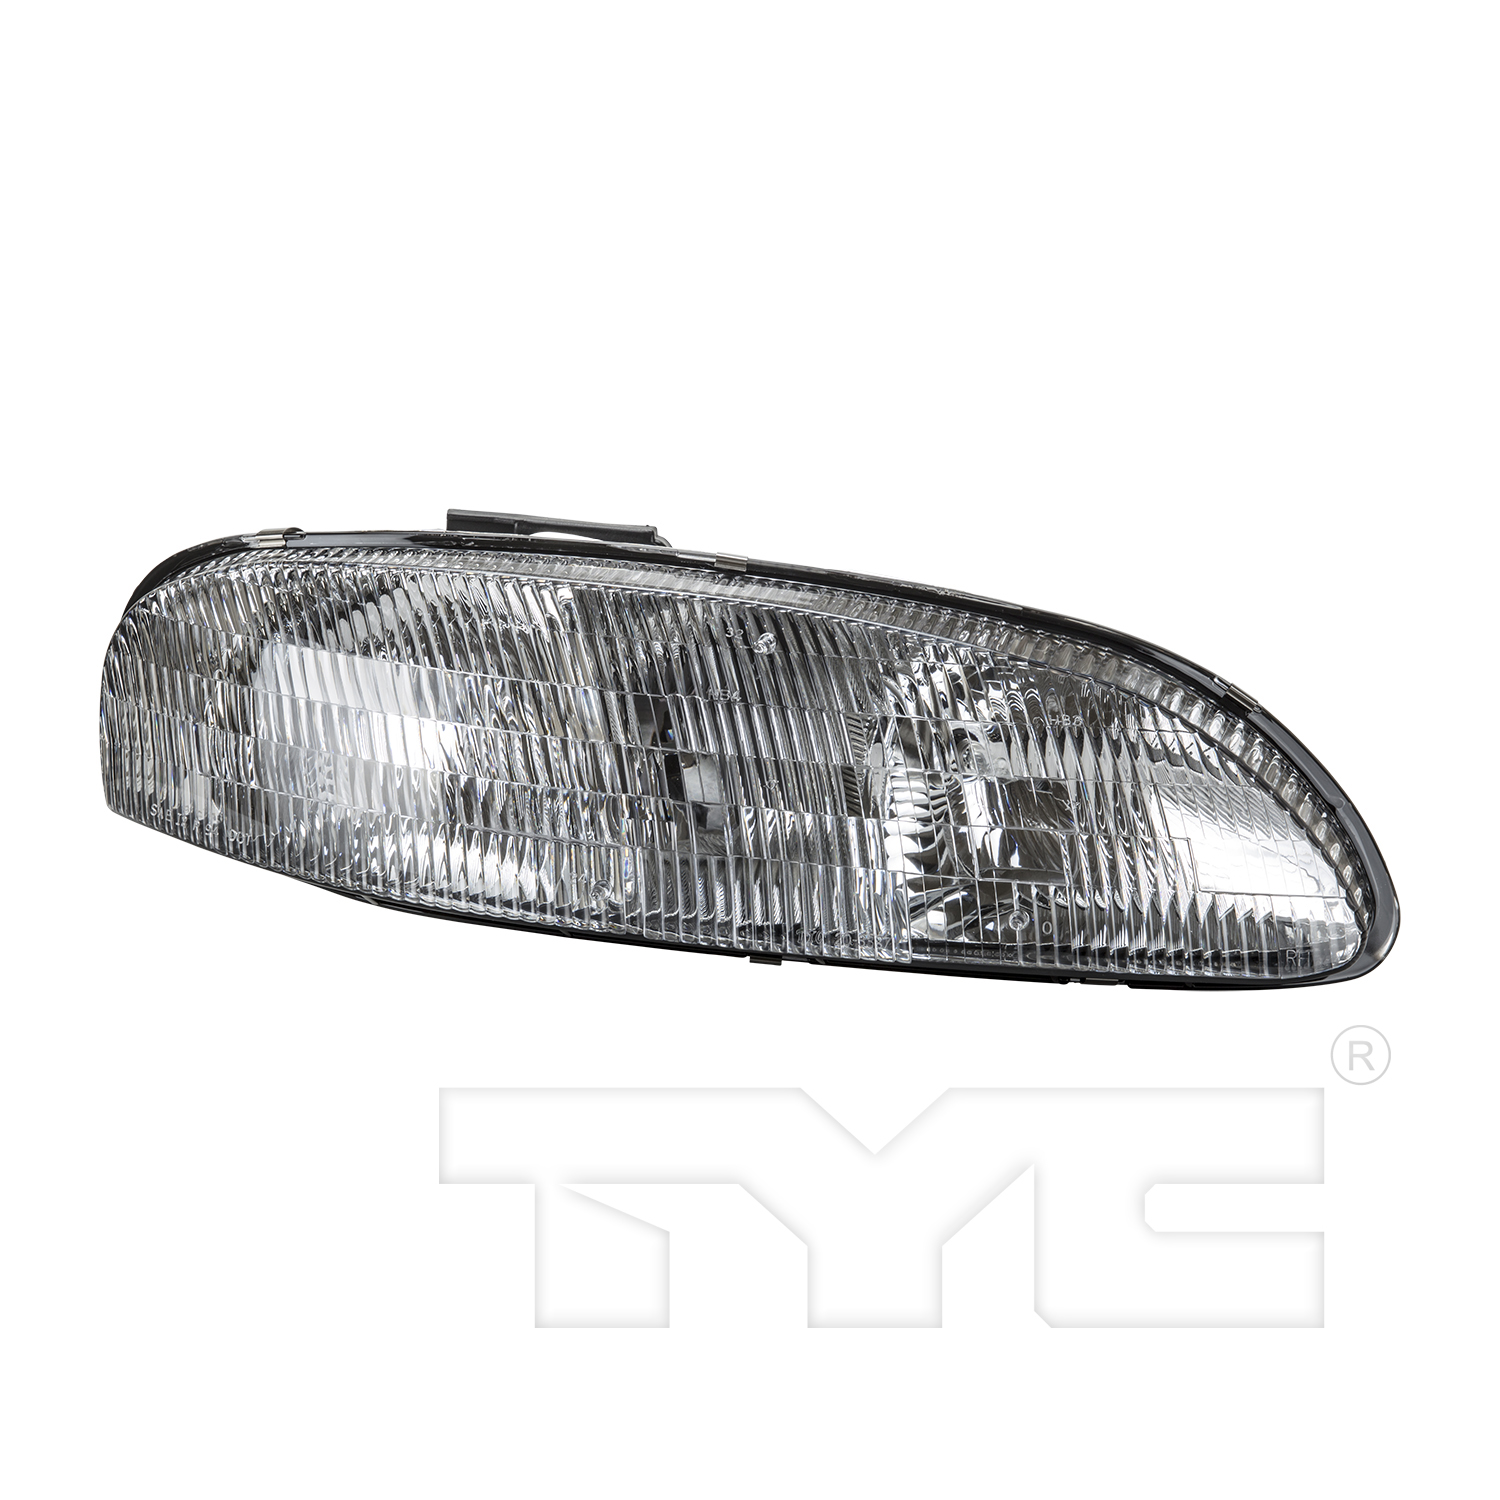 Aftermarket HEADLIGHTS for CHEVROLET - MONTE CARLO, MONTE CARLO,95-99,RT Headlamp assy composite